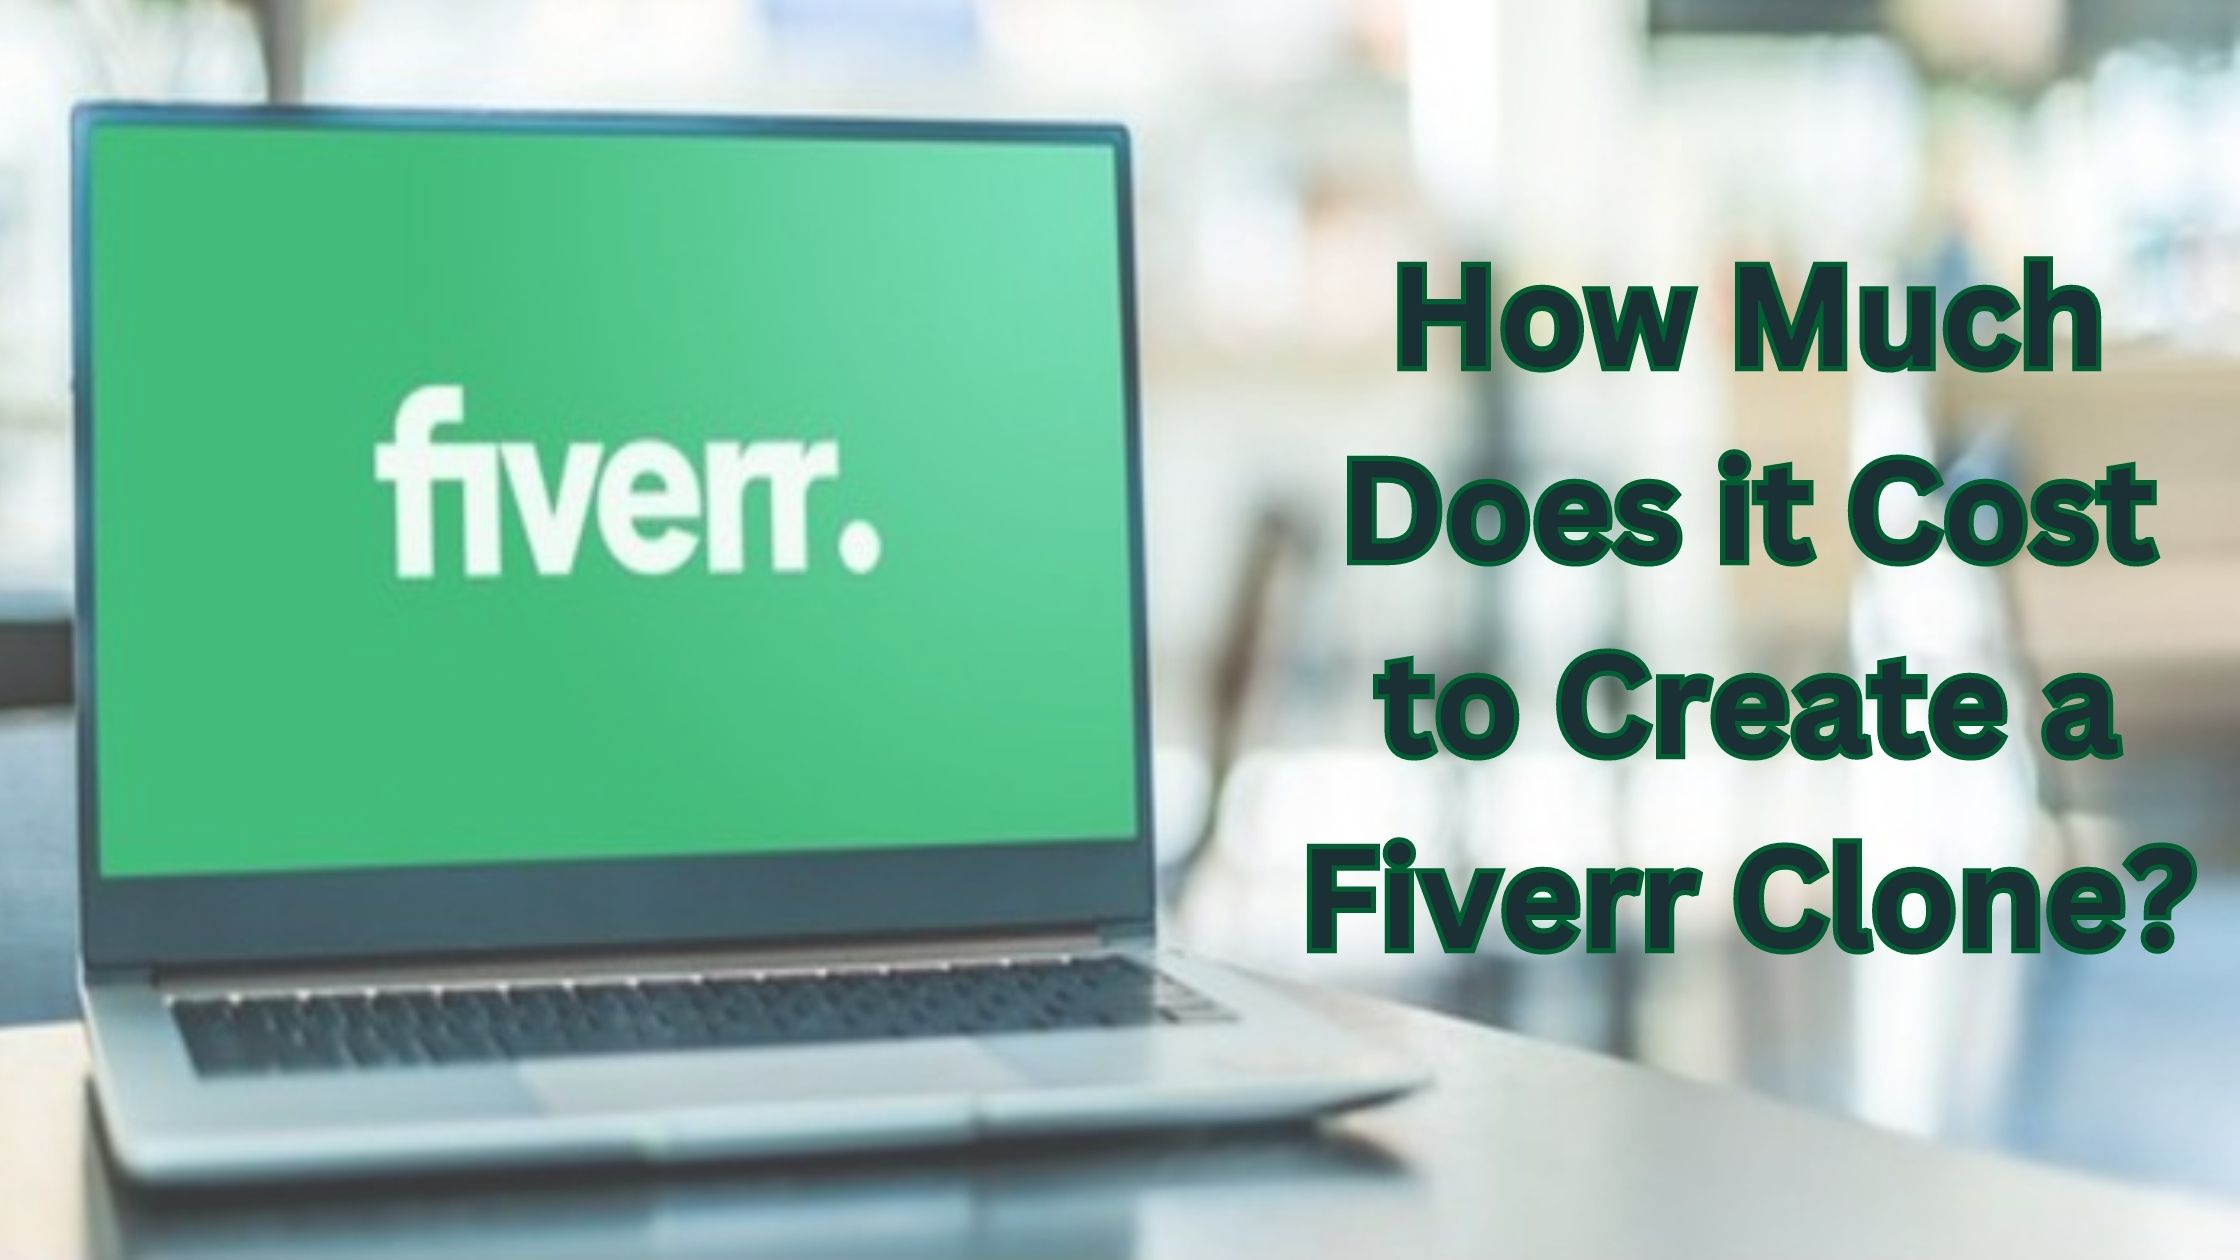 How Much Does it Cost to Create a Fiverr Clone?